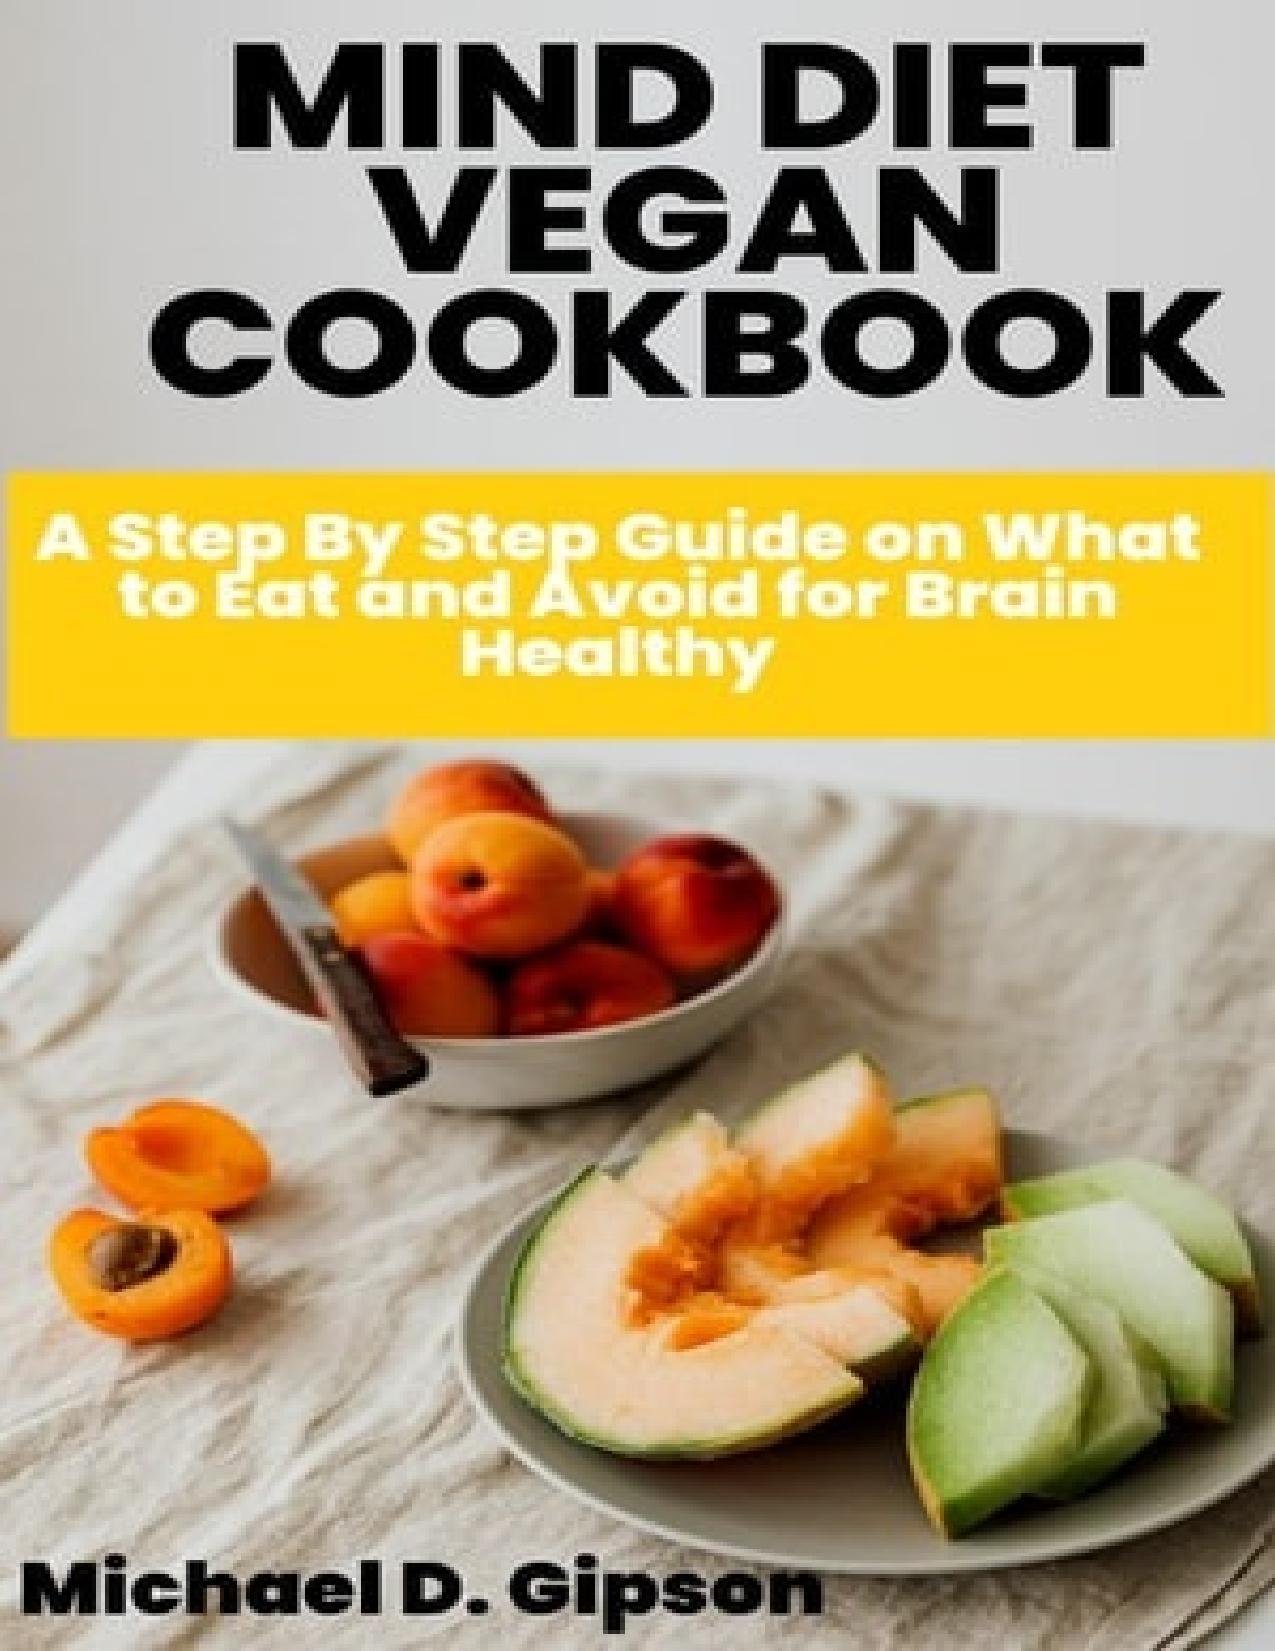 MIND DIET VEGAN COOKBOOK: A Step By Step Guide on What to Eat and Avoid for Brain Healthy by Michael D. Gipson